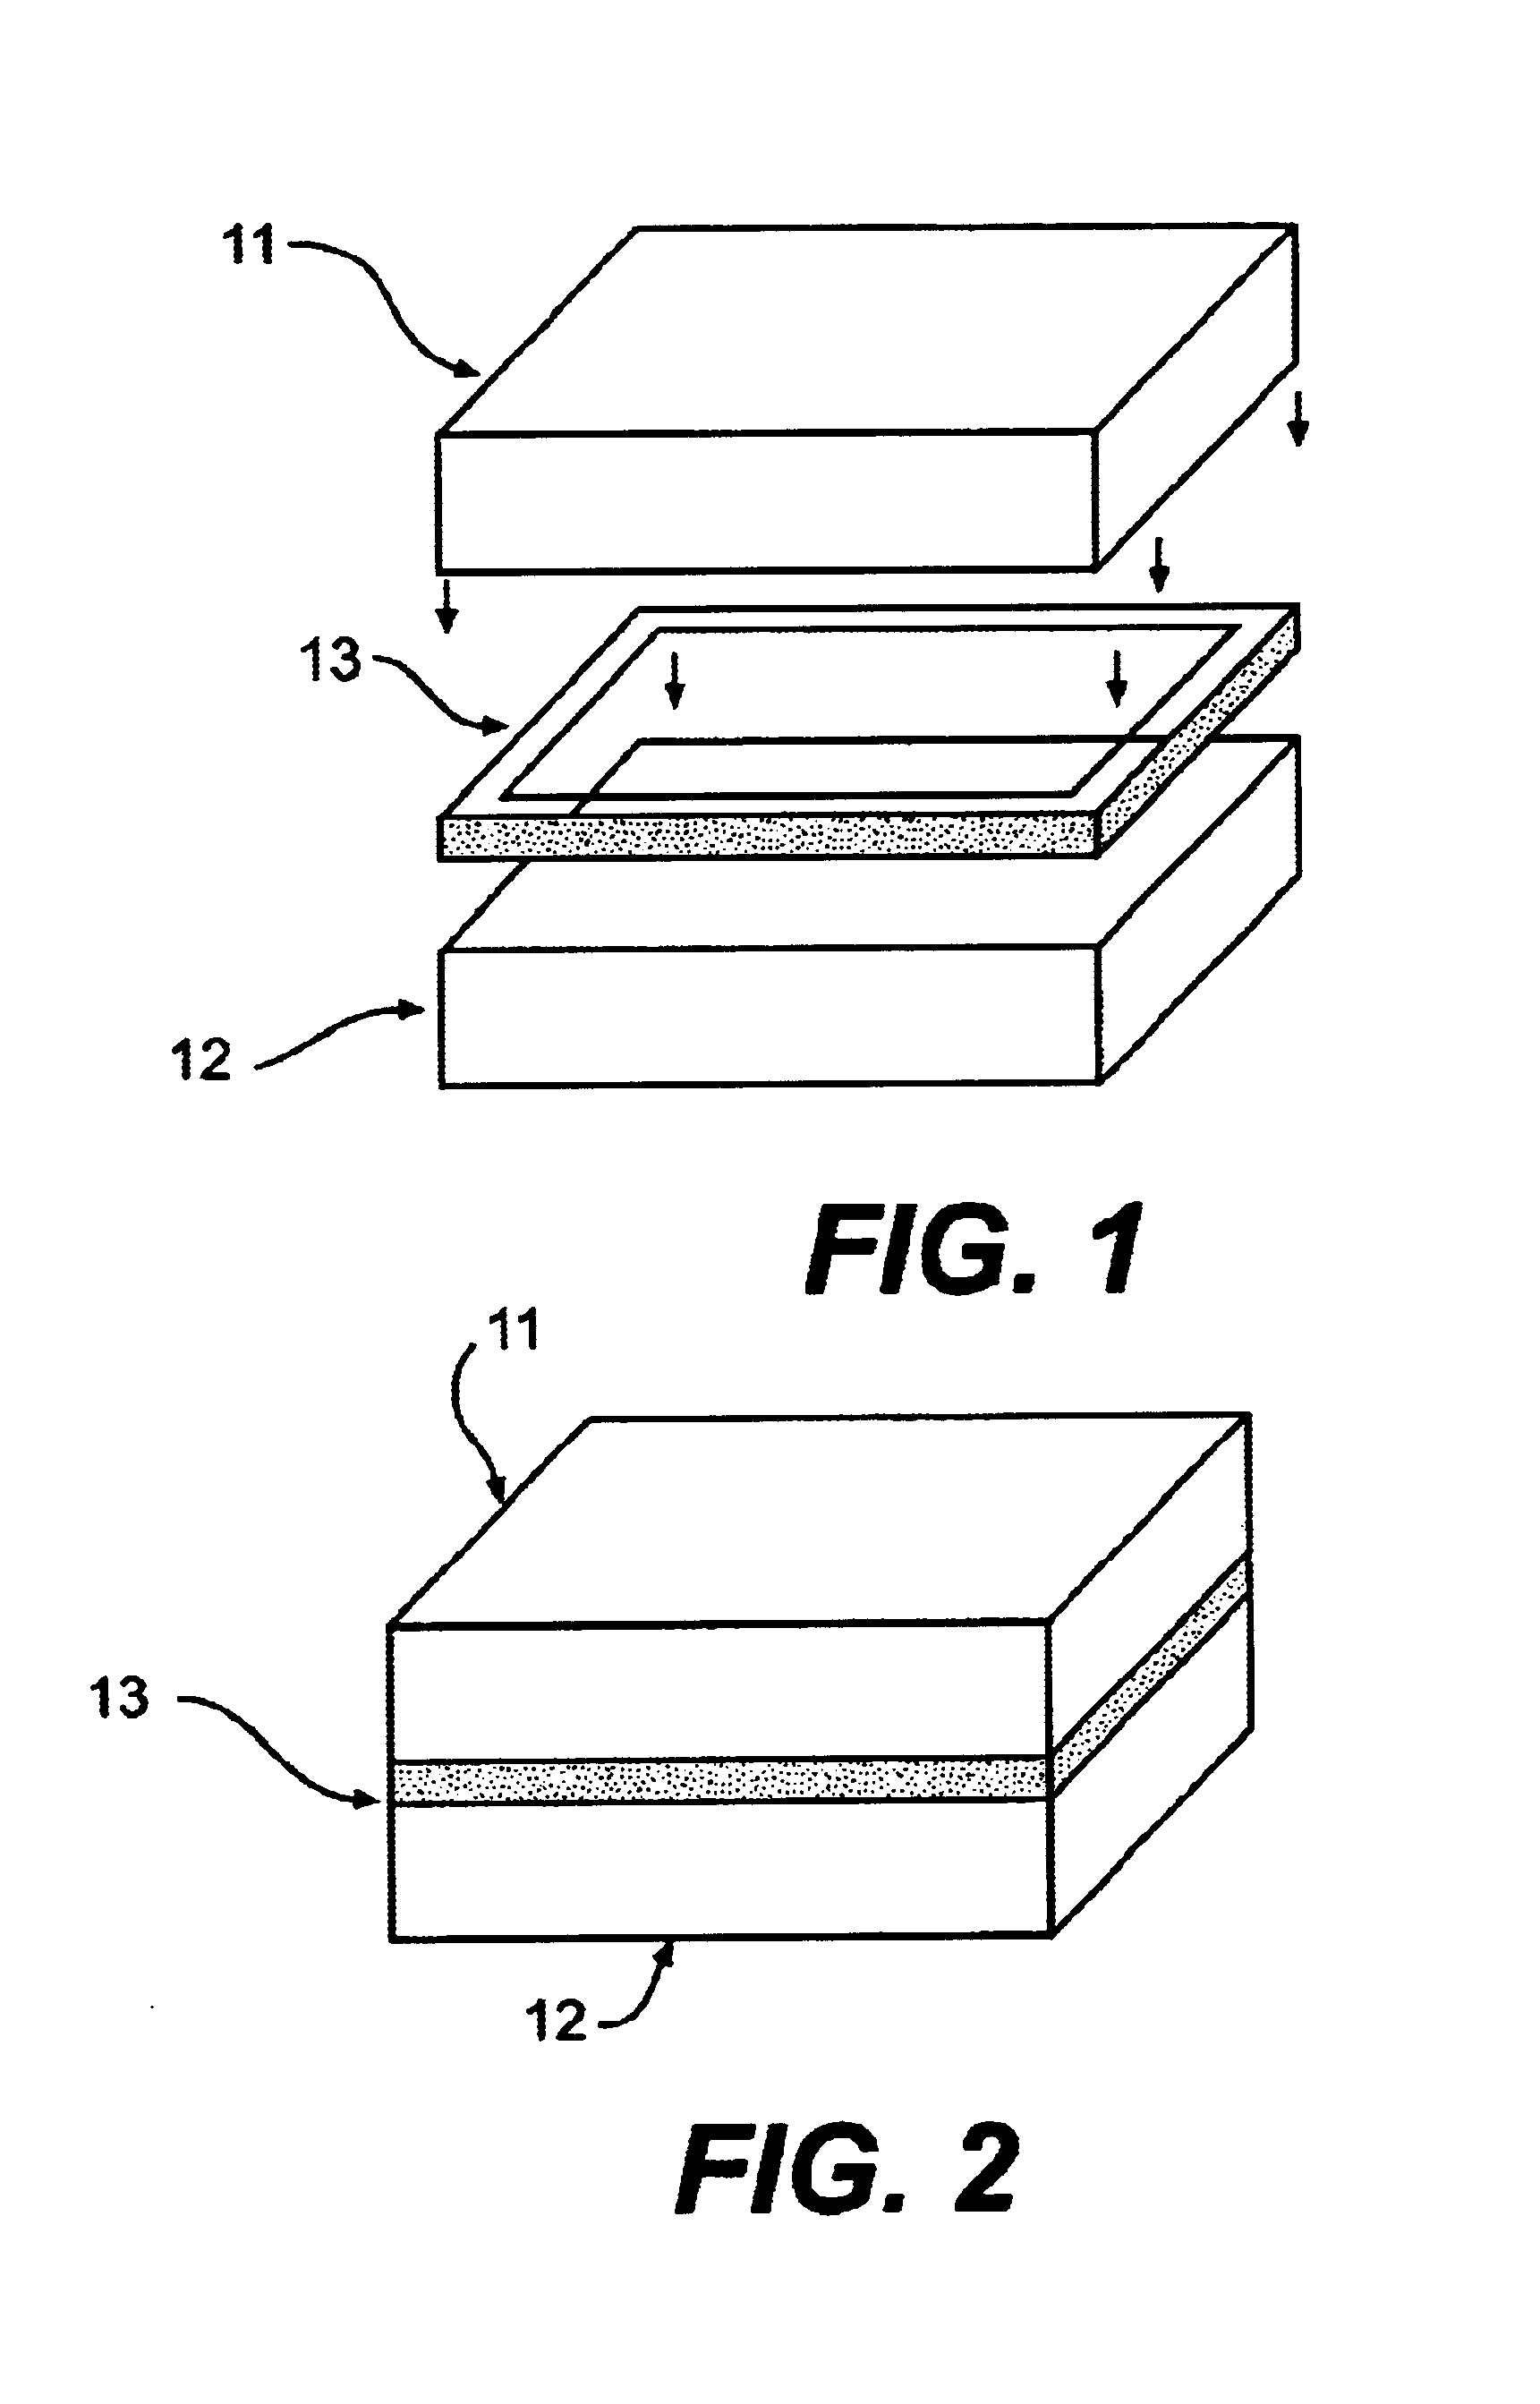 Micro-gap gas filled dielectric capacitor